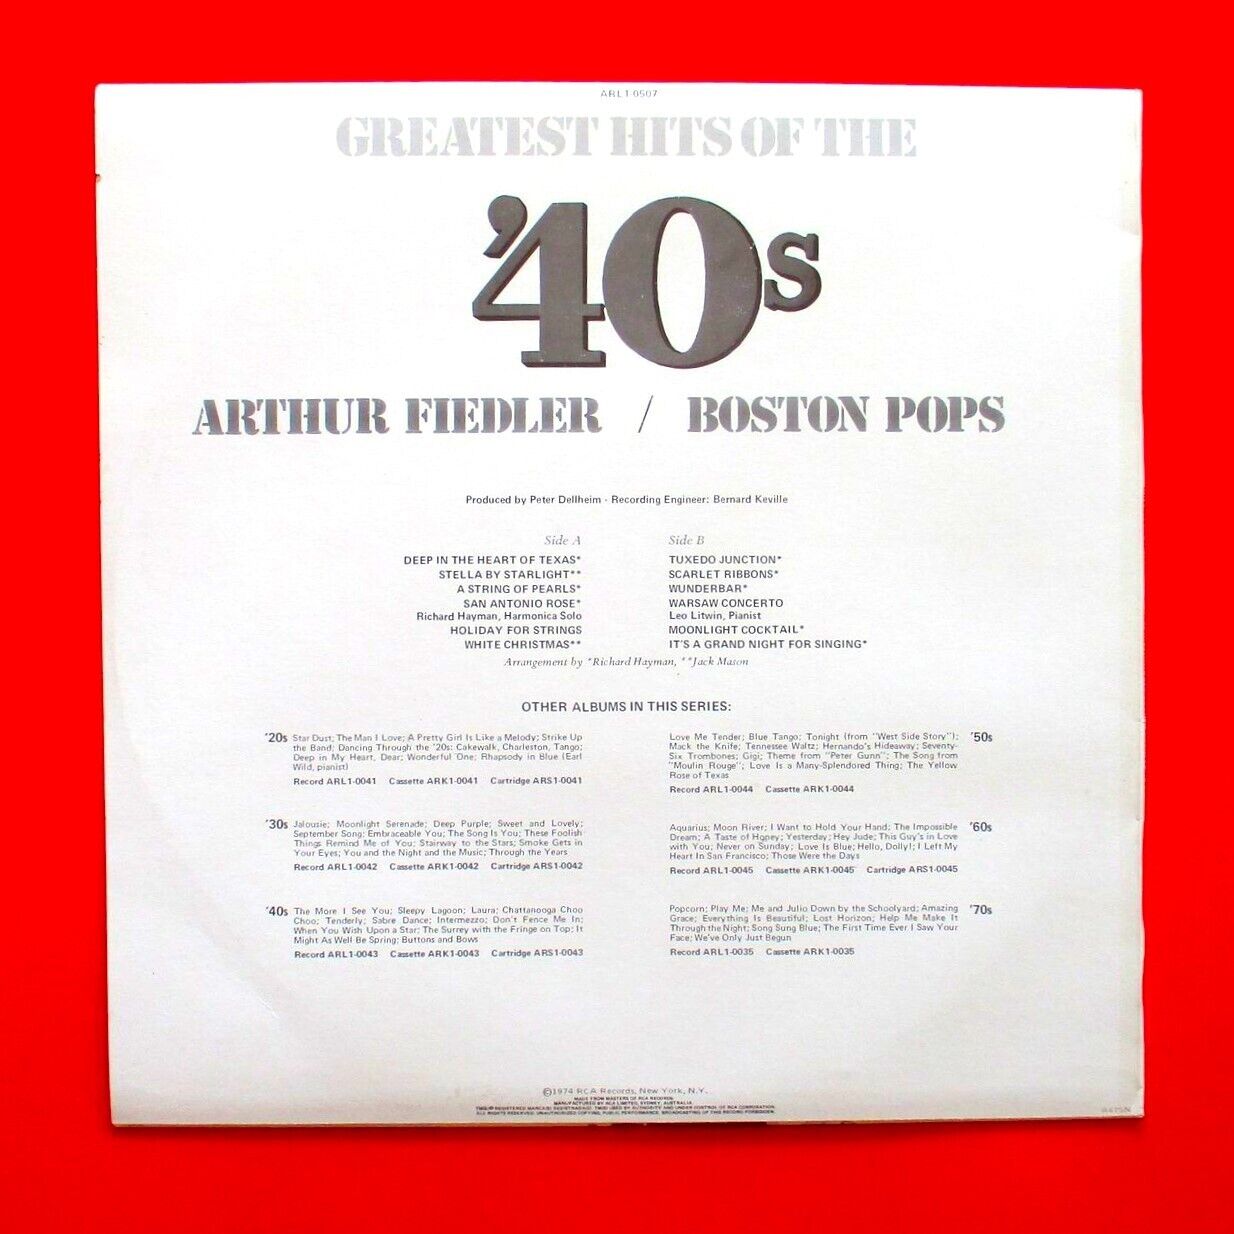 Arthur Fiedler & The Boston Pops Orchestra ‎Greatest Hits Of The '40s Vol. 2 LP